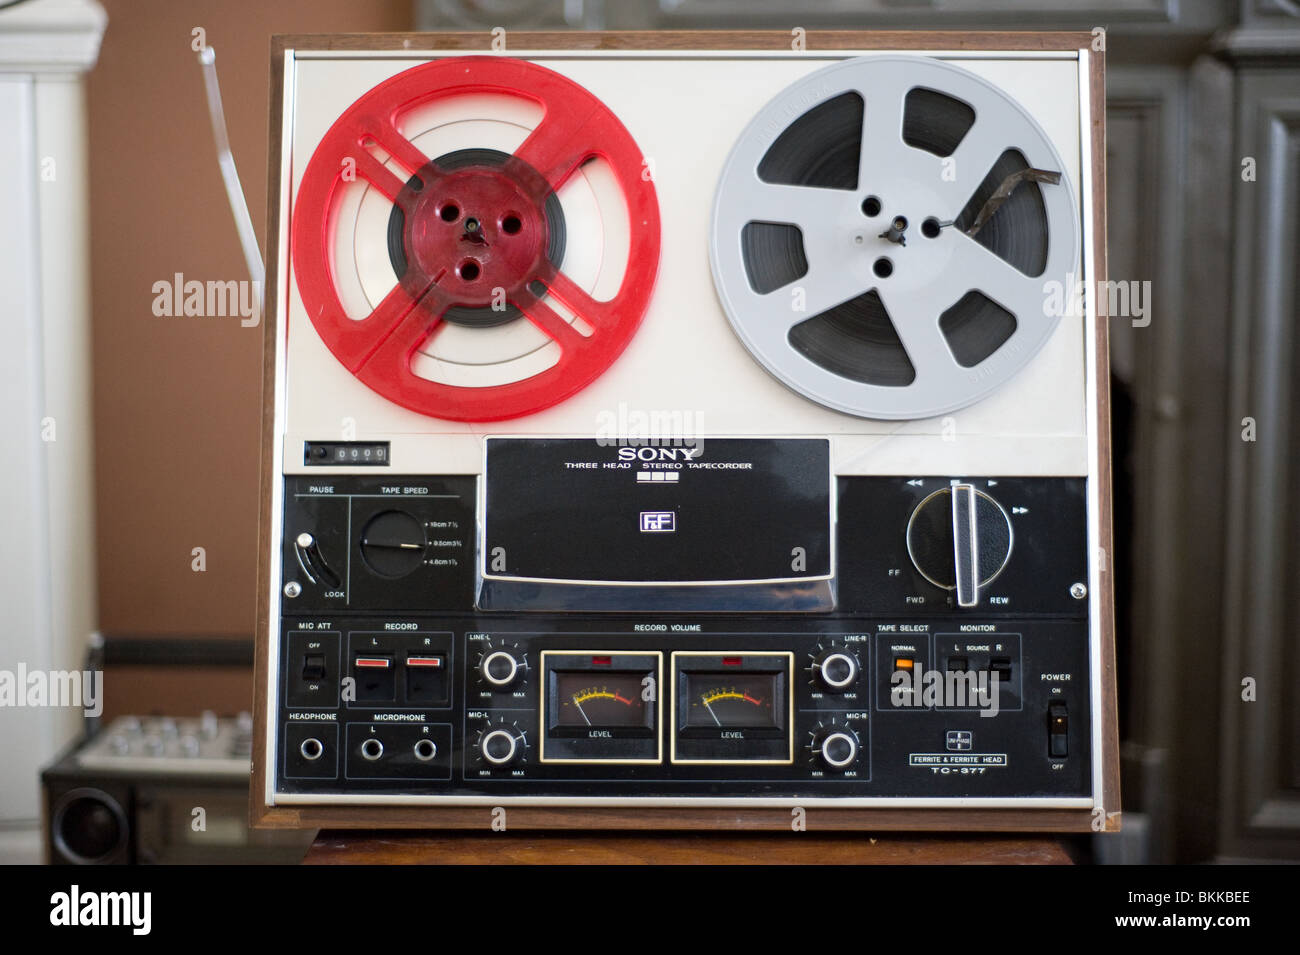 1,300+ Reel To Reel Tape Old Fashioned Sound Recording Equipment